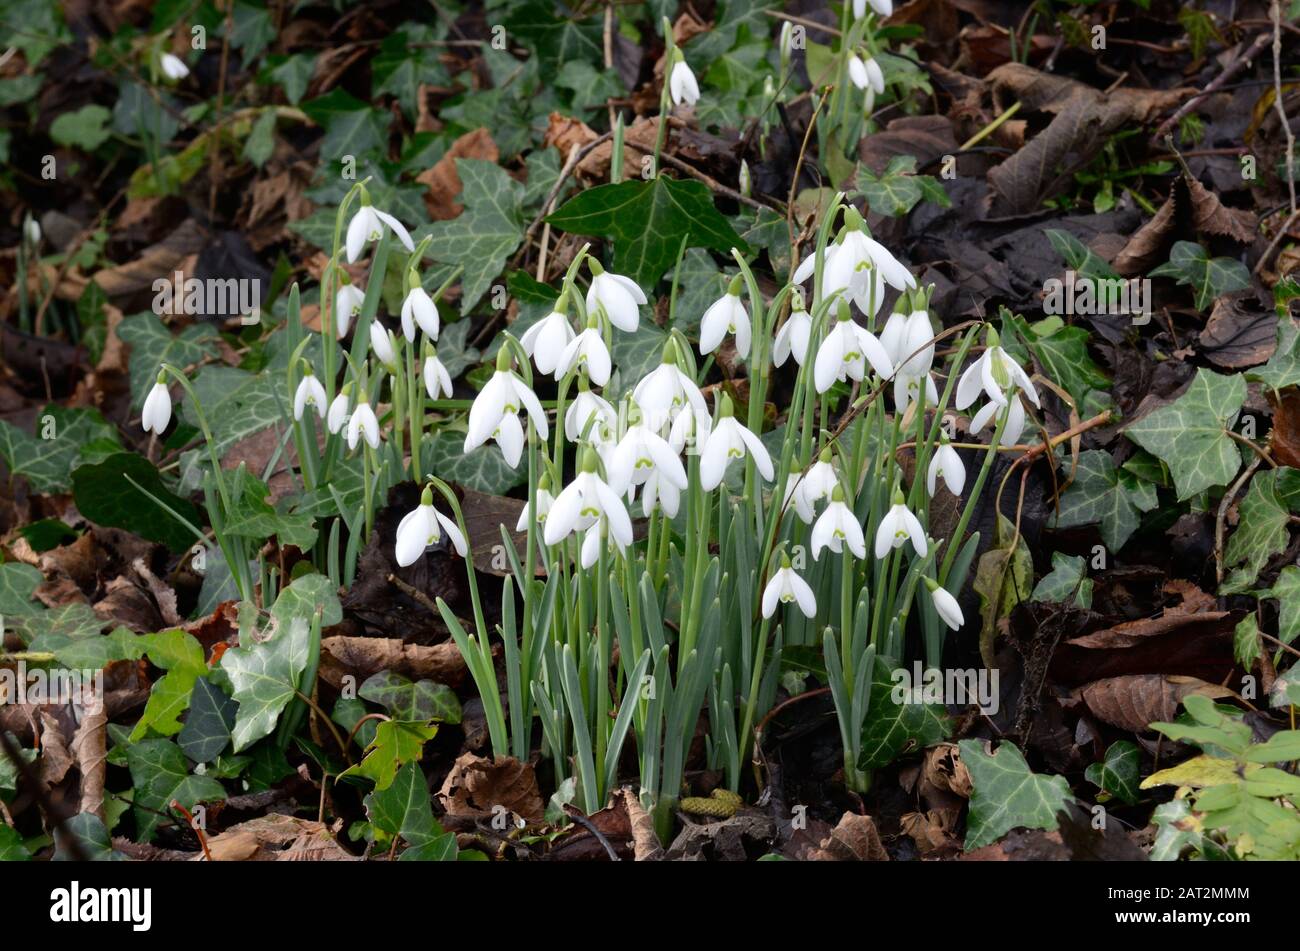 Snowdrops white spring winter flowers growing on a woodland floor Stock Photo